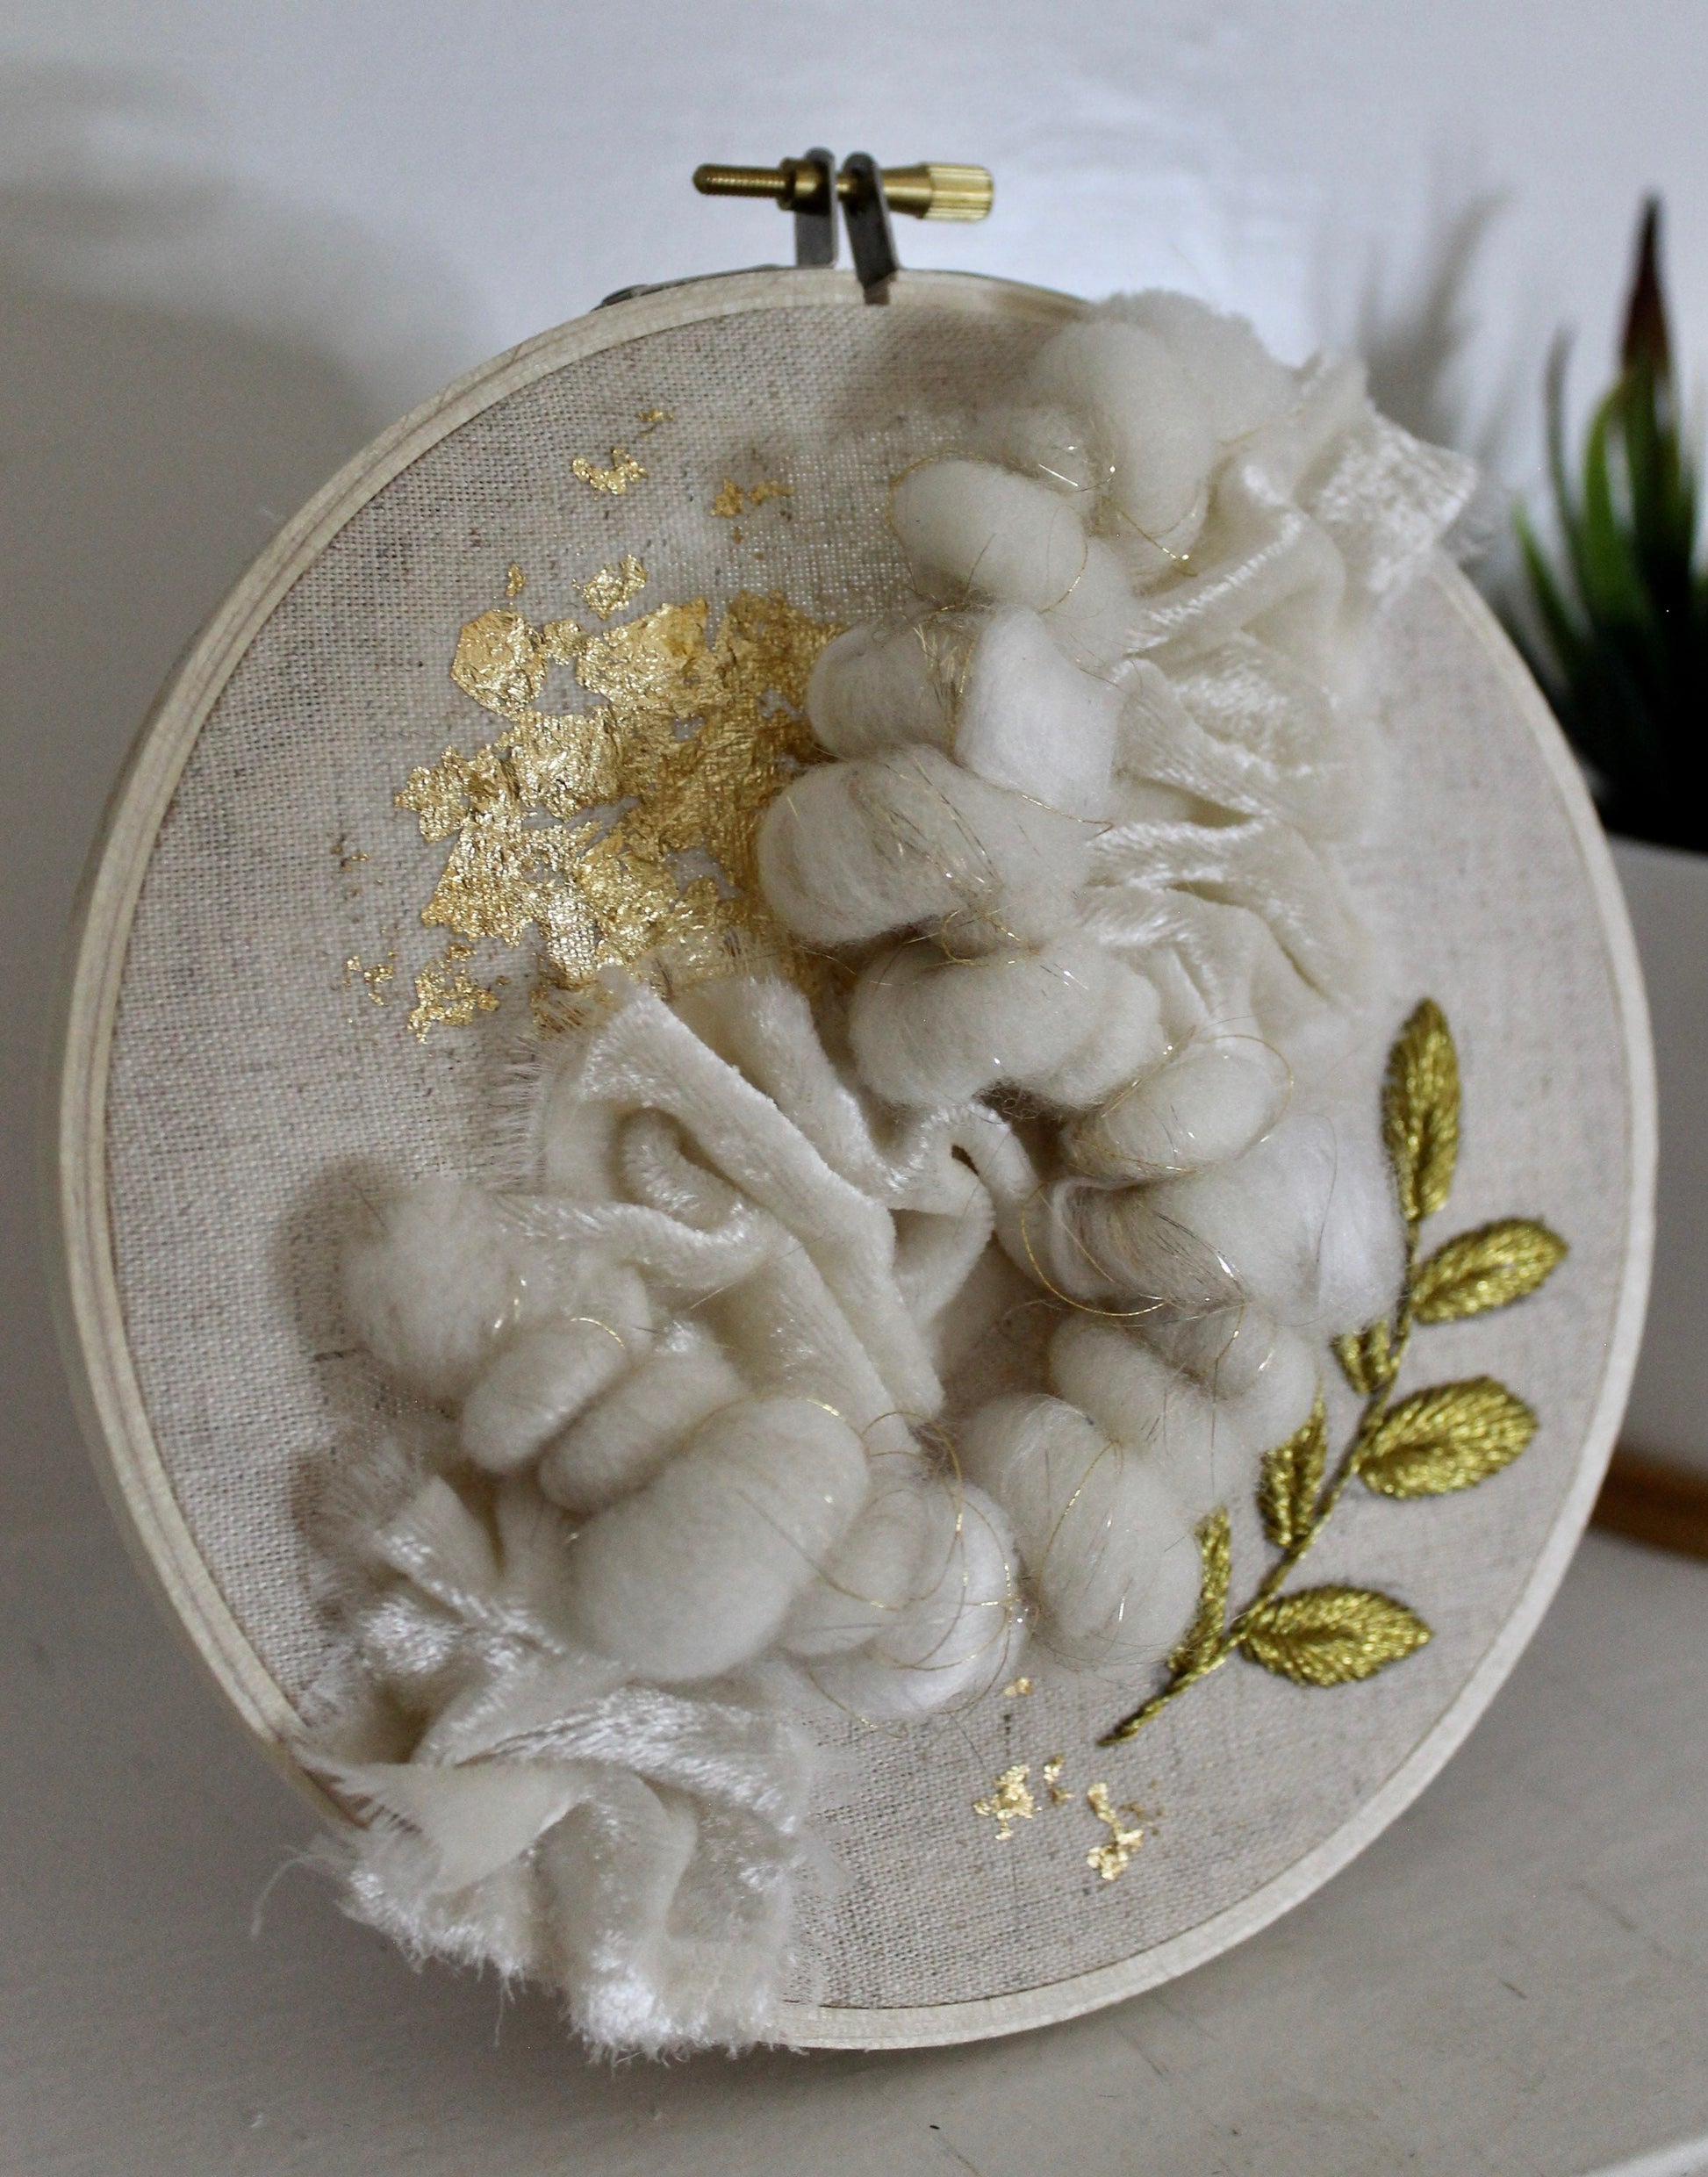 White and gold embroidery | embroidery hoop | foil embroidery | diy | gift idea | flower